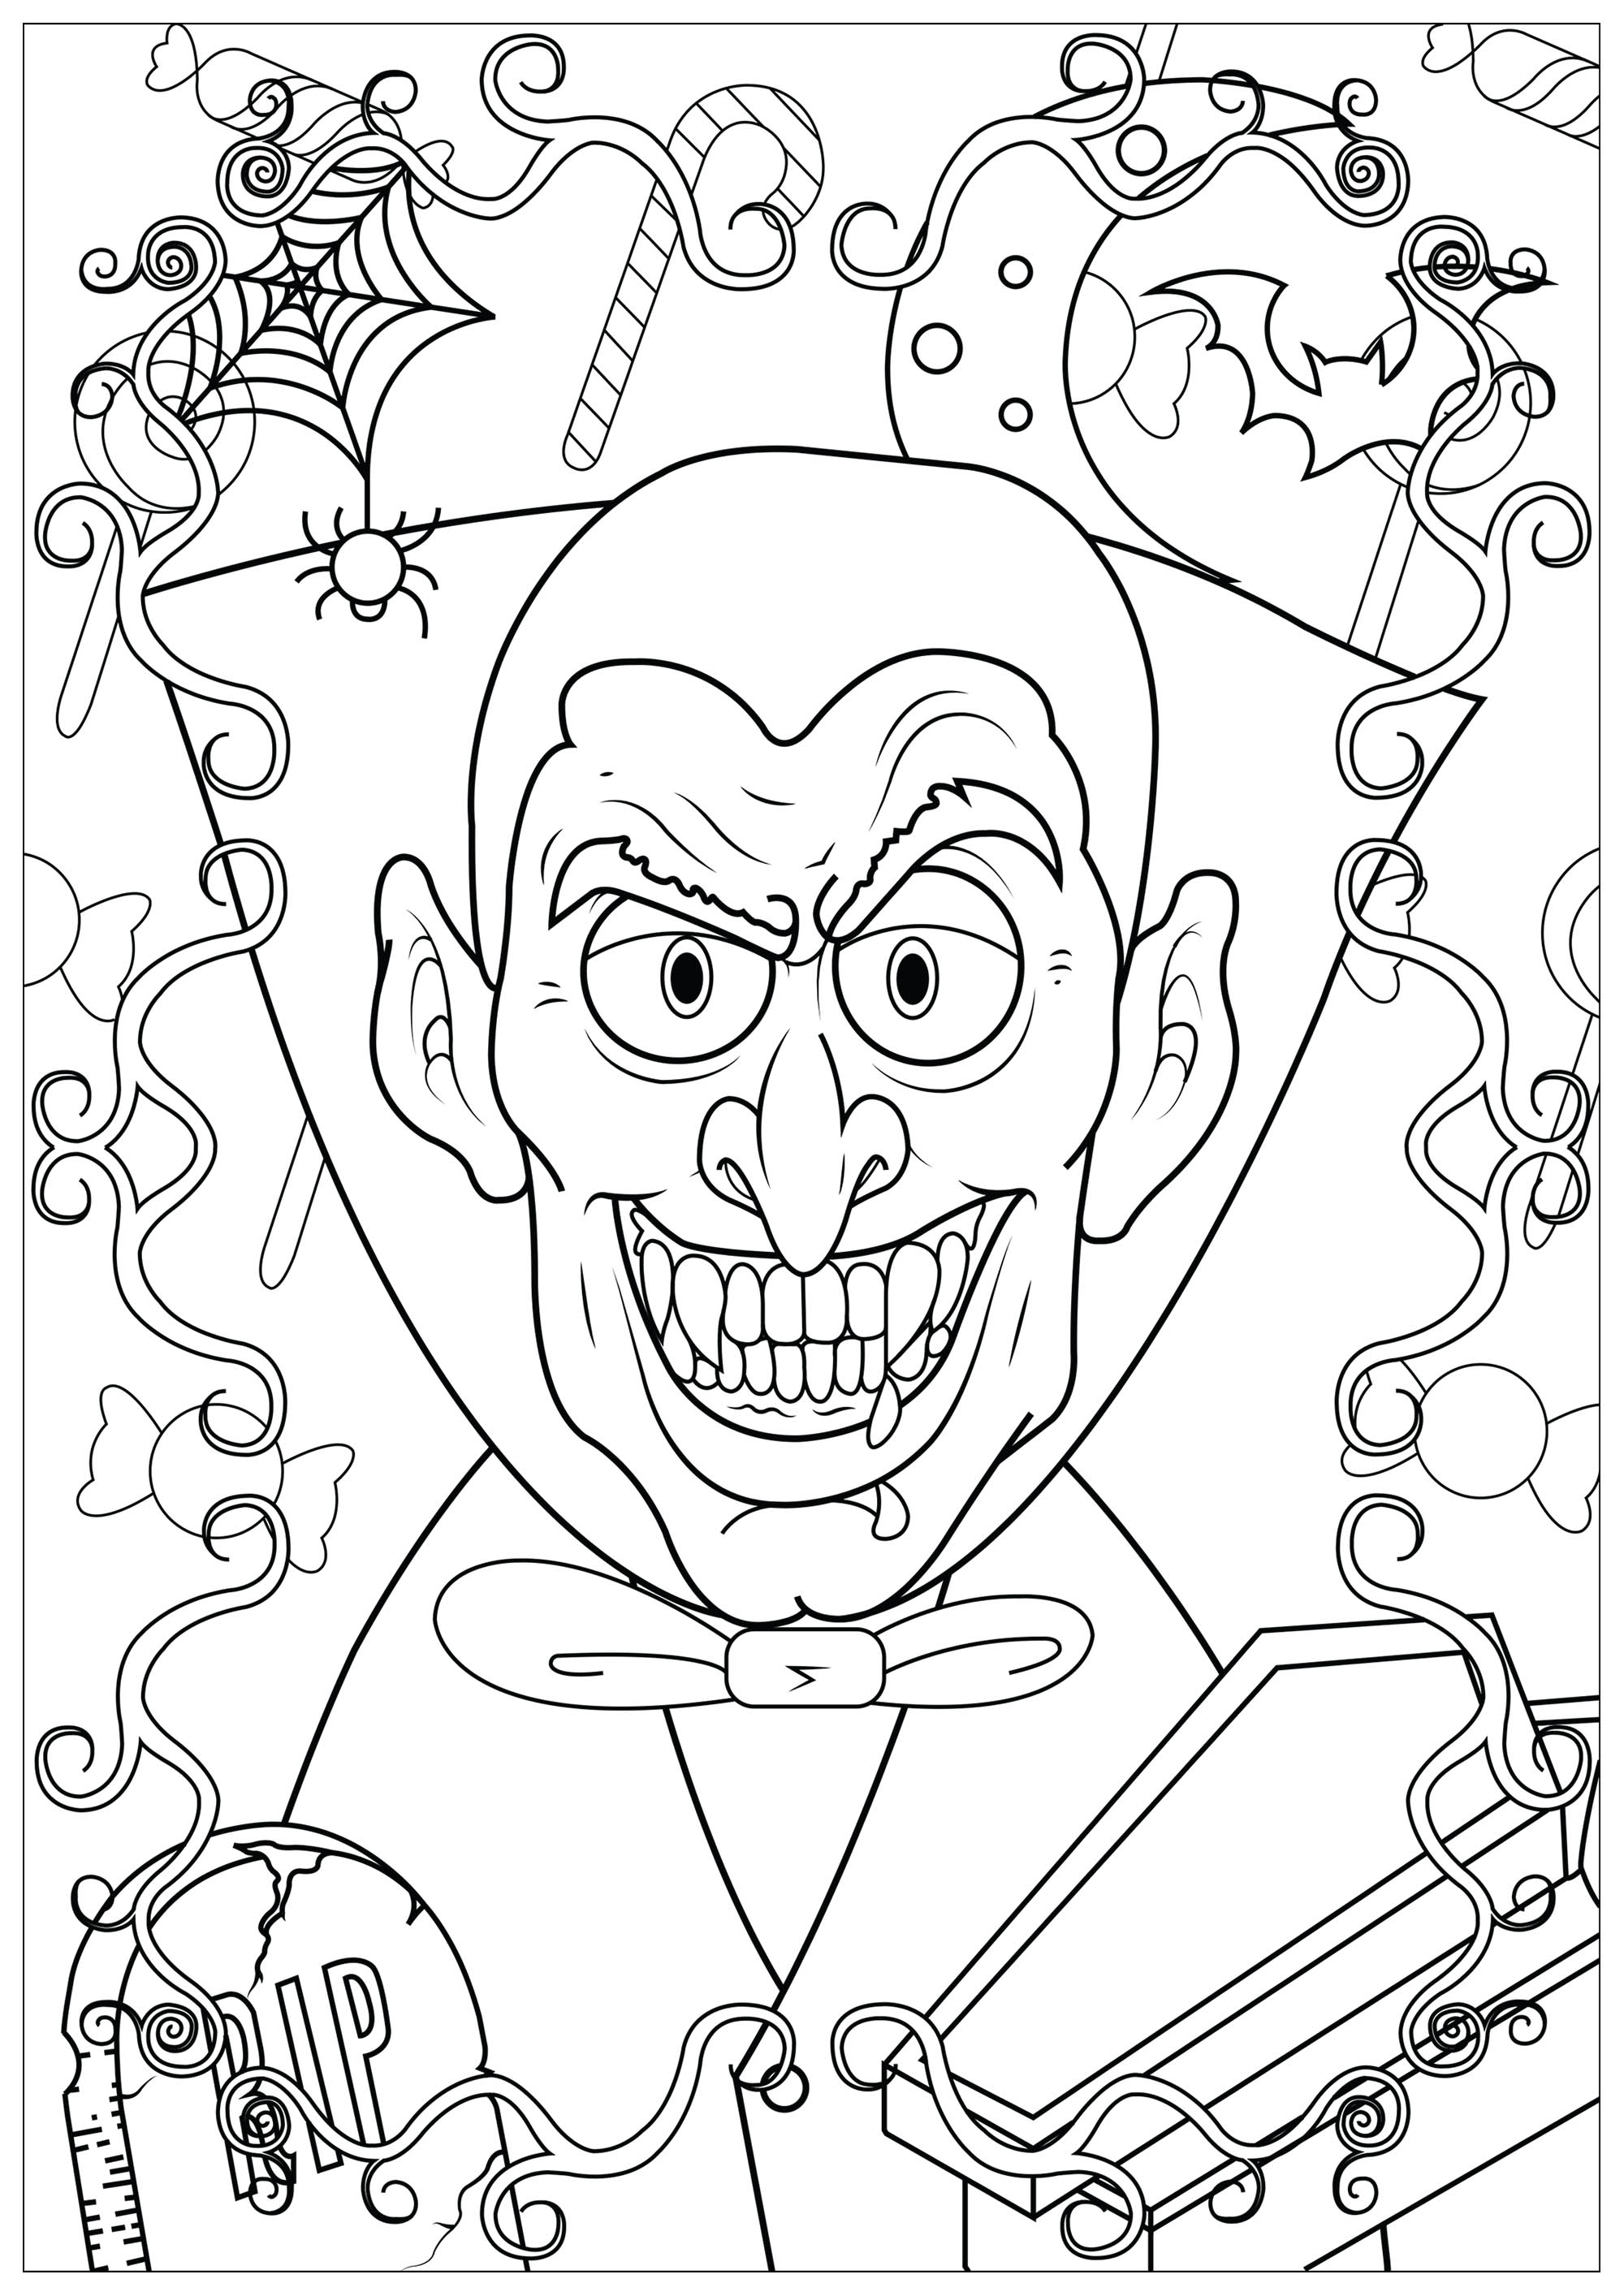 Vampire halloween HalloweenColoring Pages